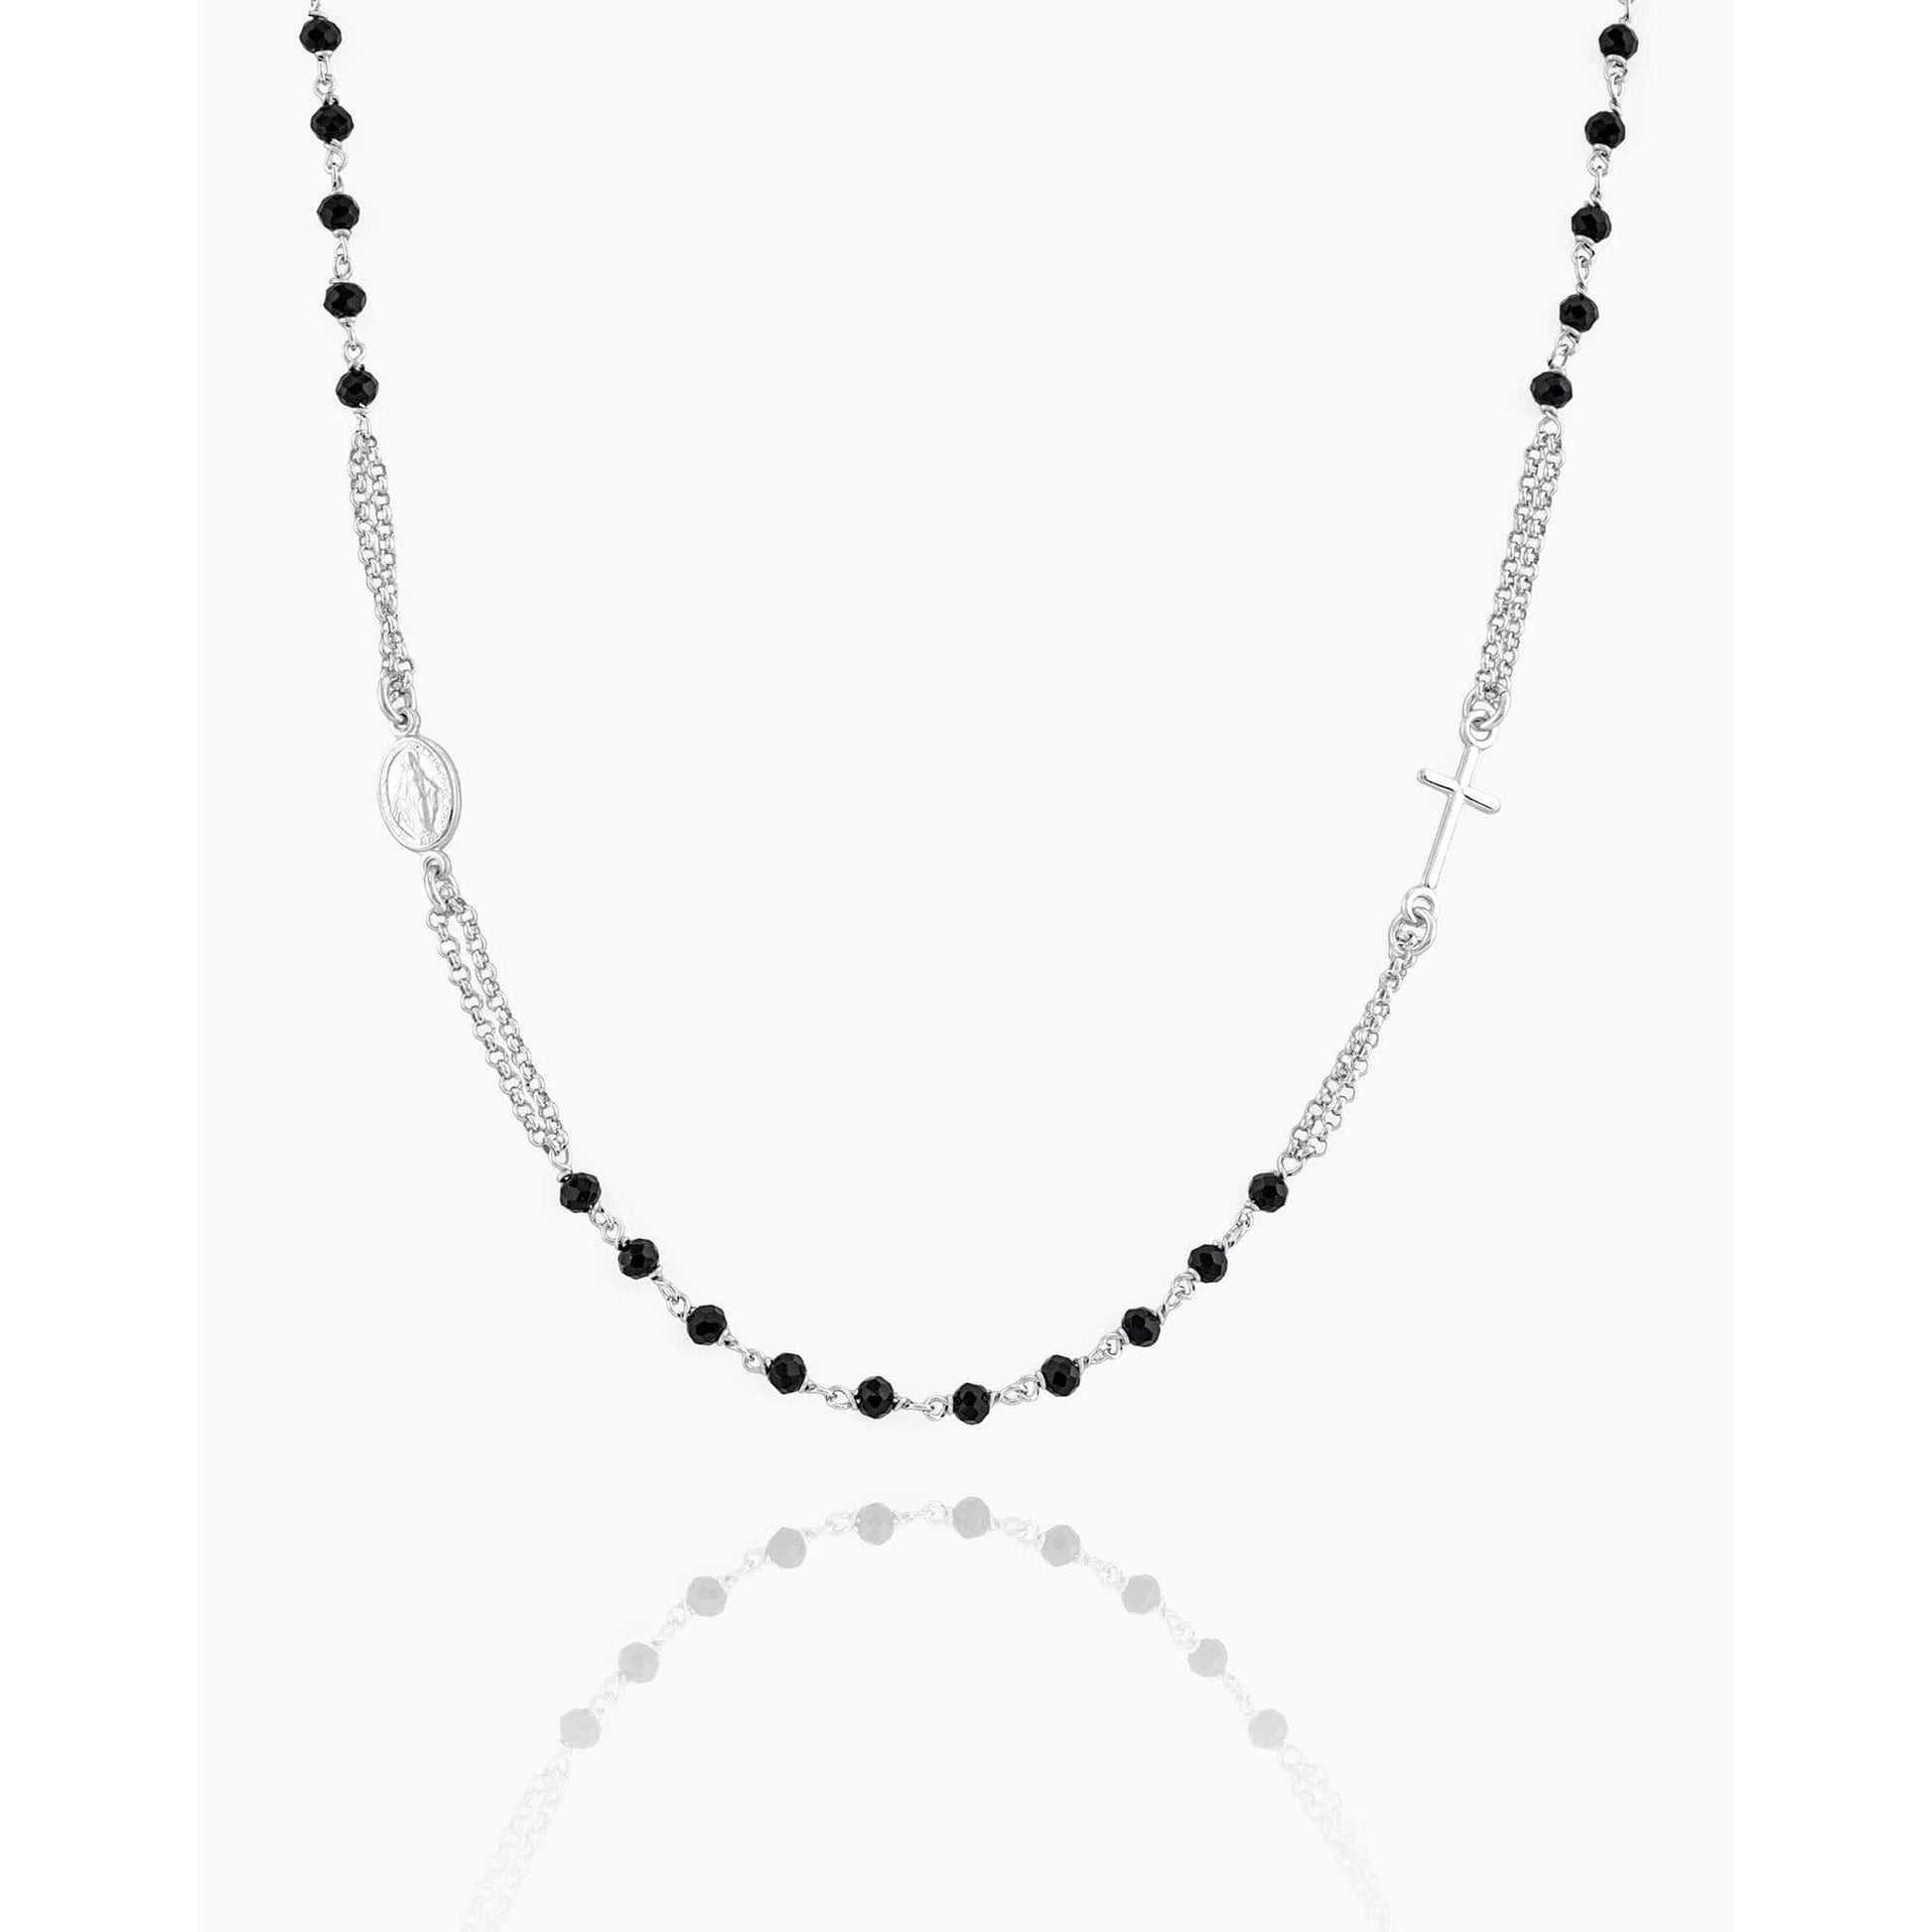 MONDO CATTOLICO Prayer Beads STERLING SILVER PLATED SACRED HEART 3 MM BLACK BEADS NECKLACE